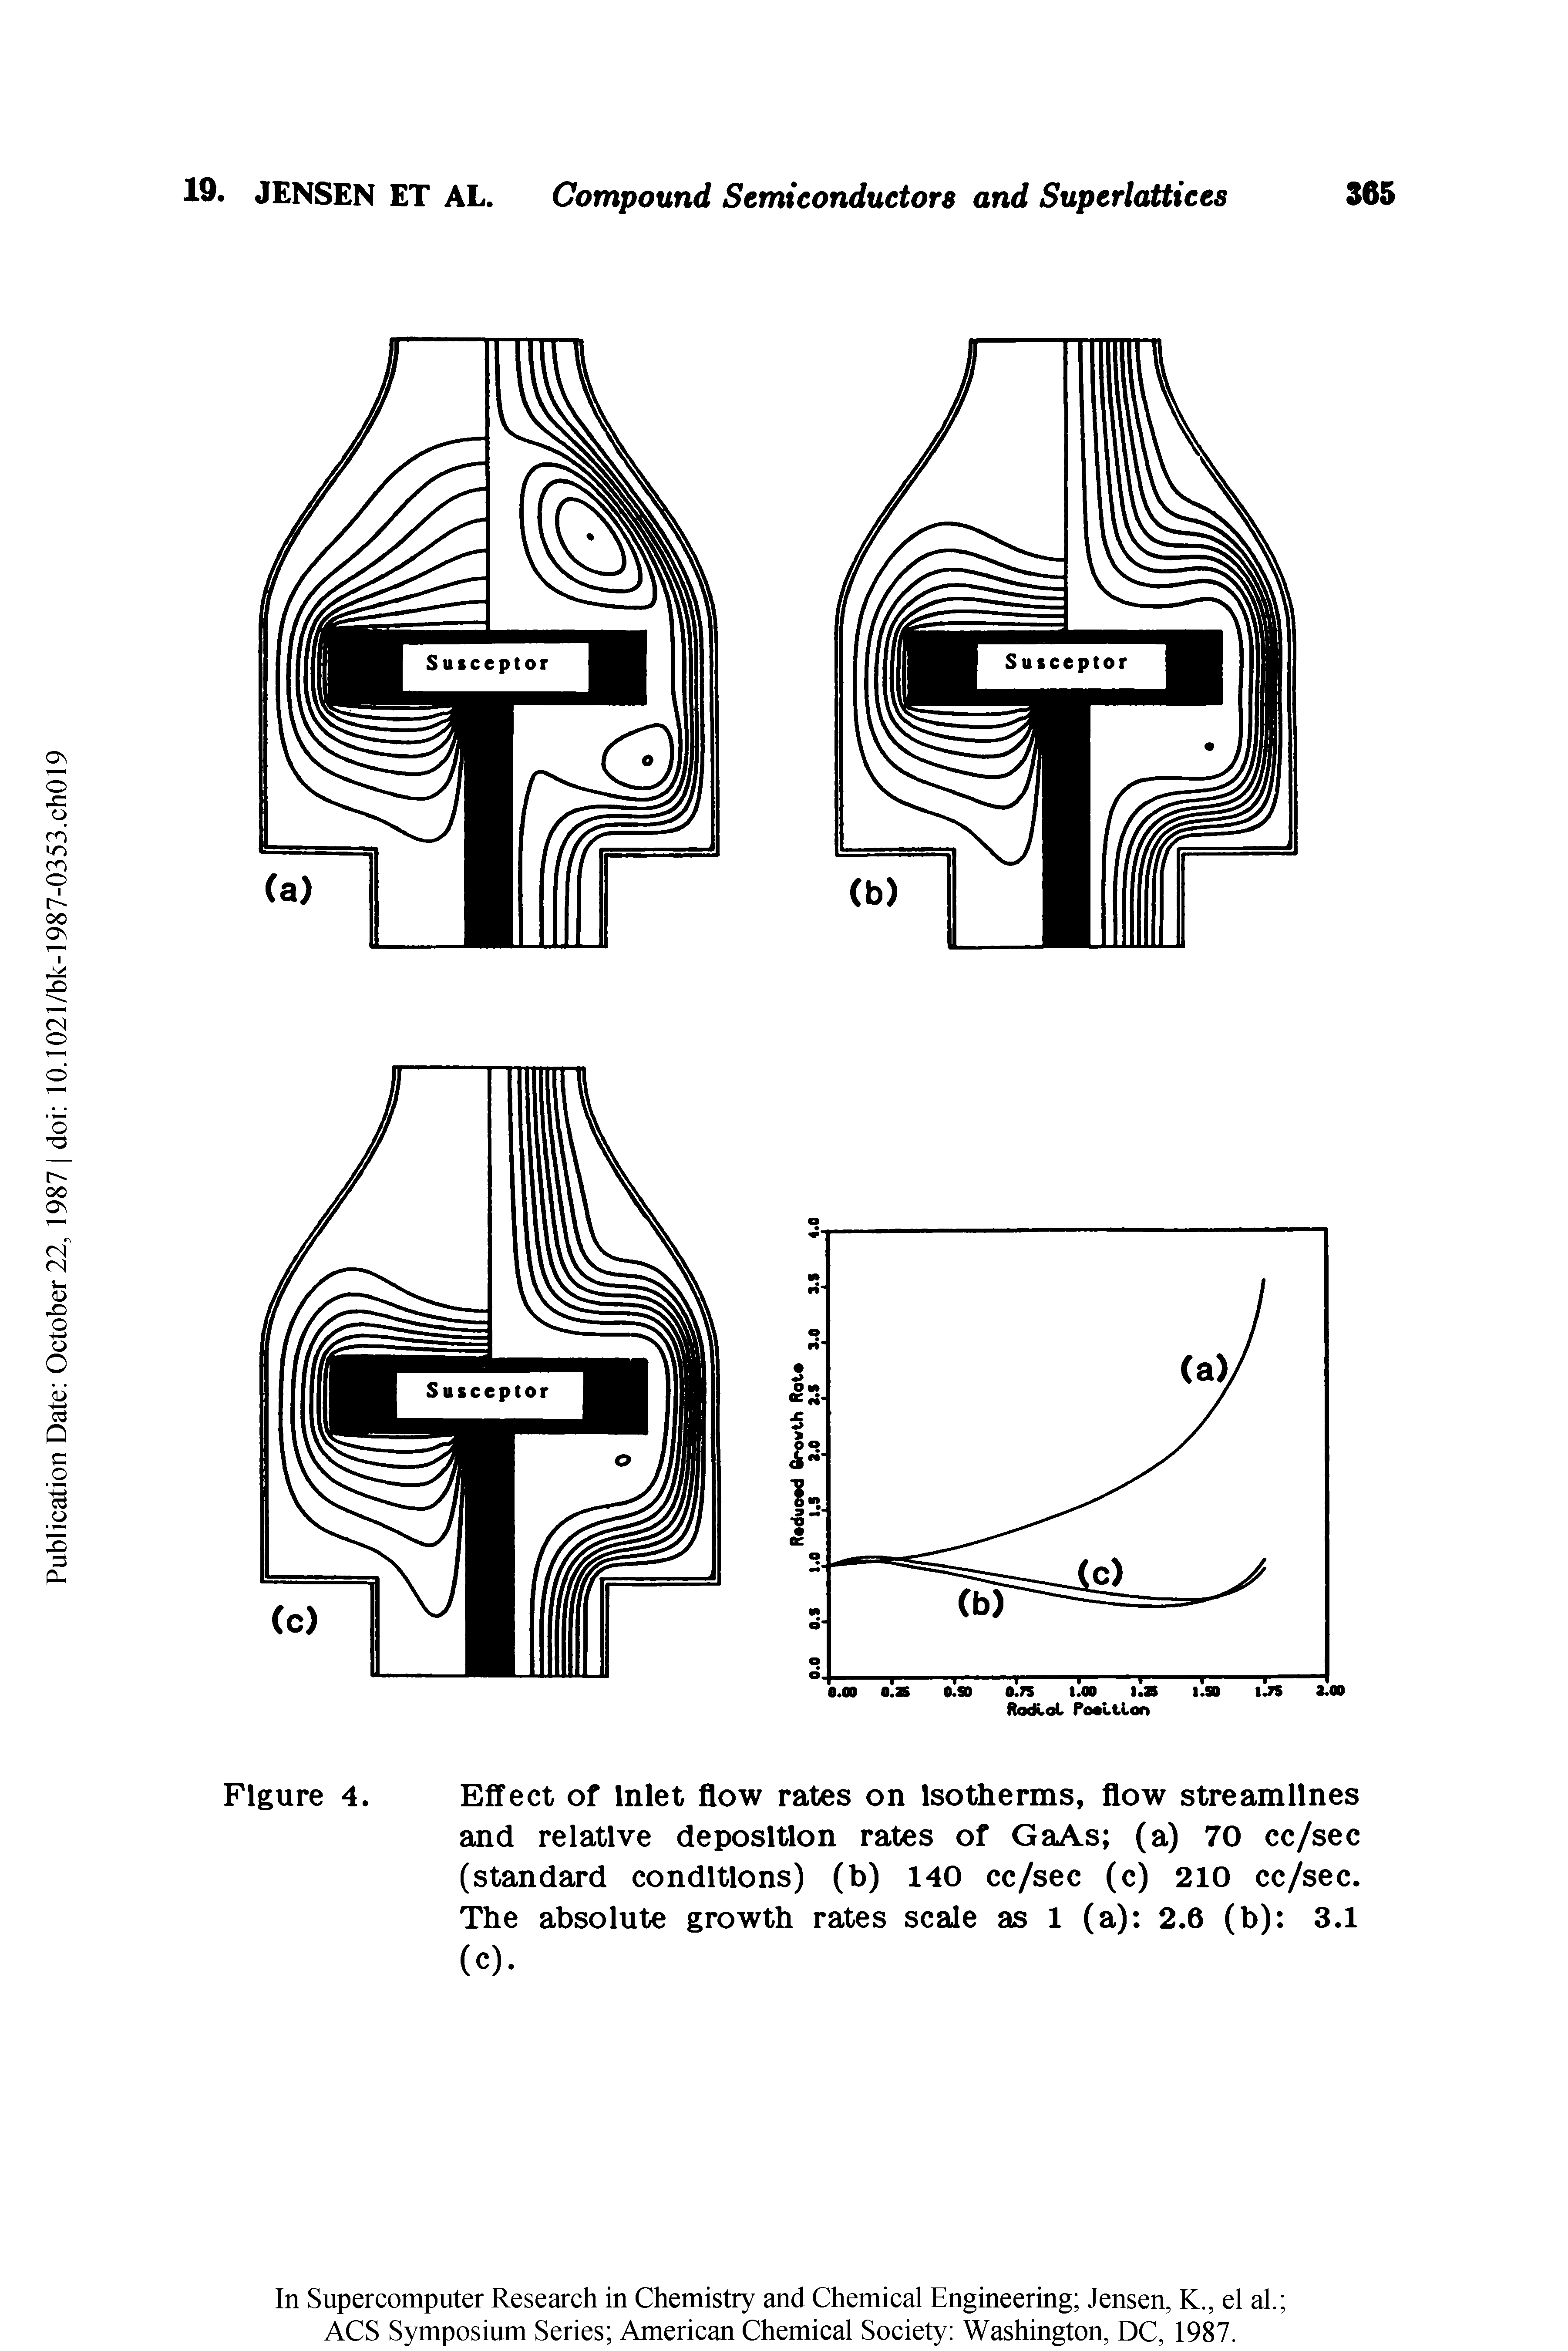 Figure 4. Effect of Inlet flow rates on Isotherms, flow streamlines and relative deposition rates of GaAs (a) 70 cc/sec (standard conditions) (b) 140 cc/sec (c) 210 cc/sec. The absolute growth rates scale as 1 (a) 2.6 (b) 3.1 (c).